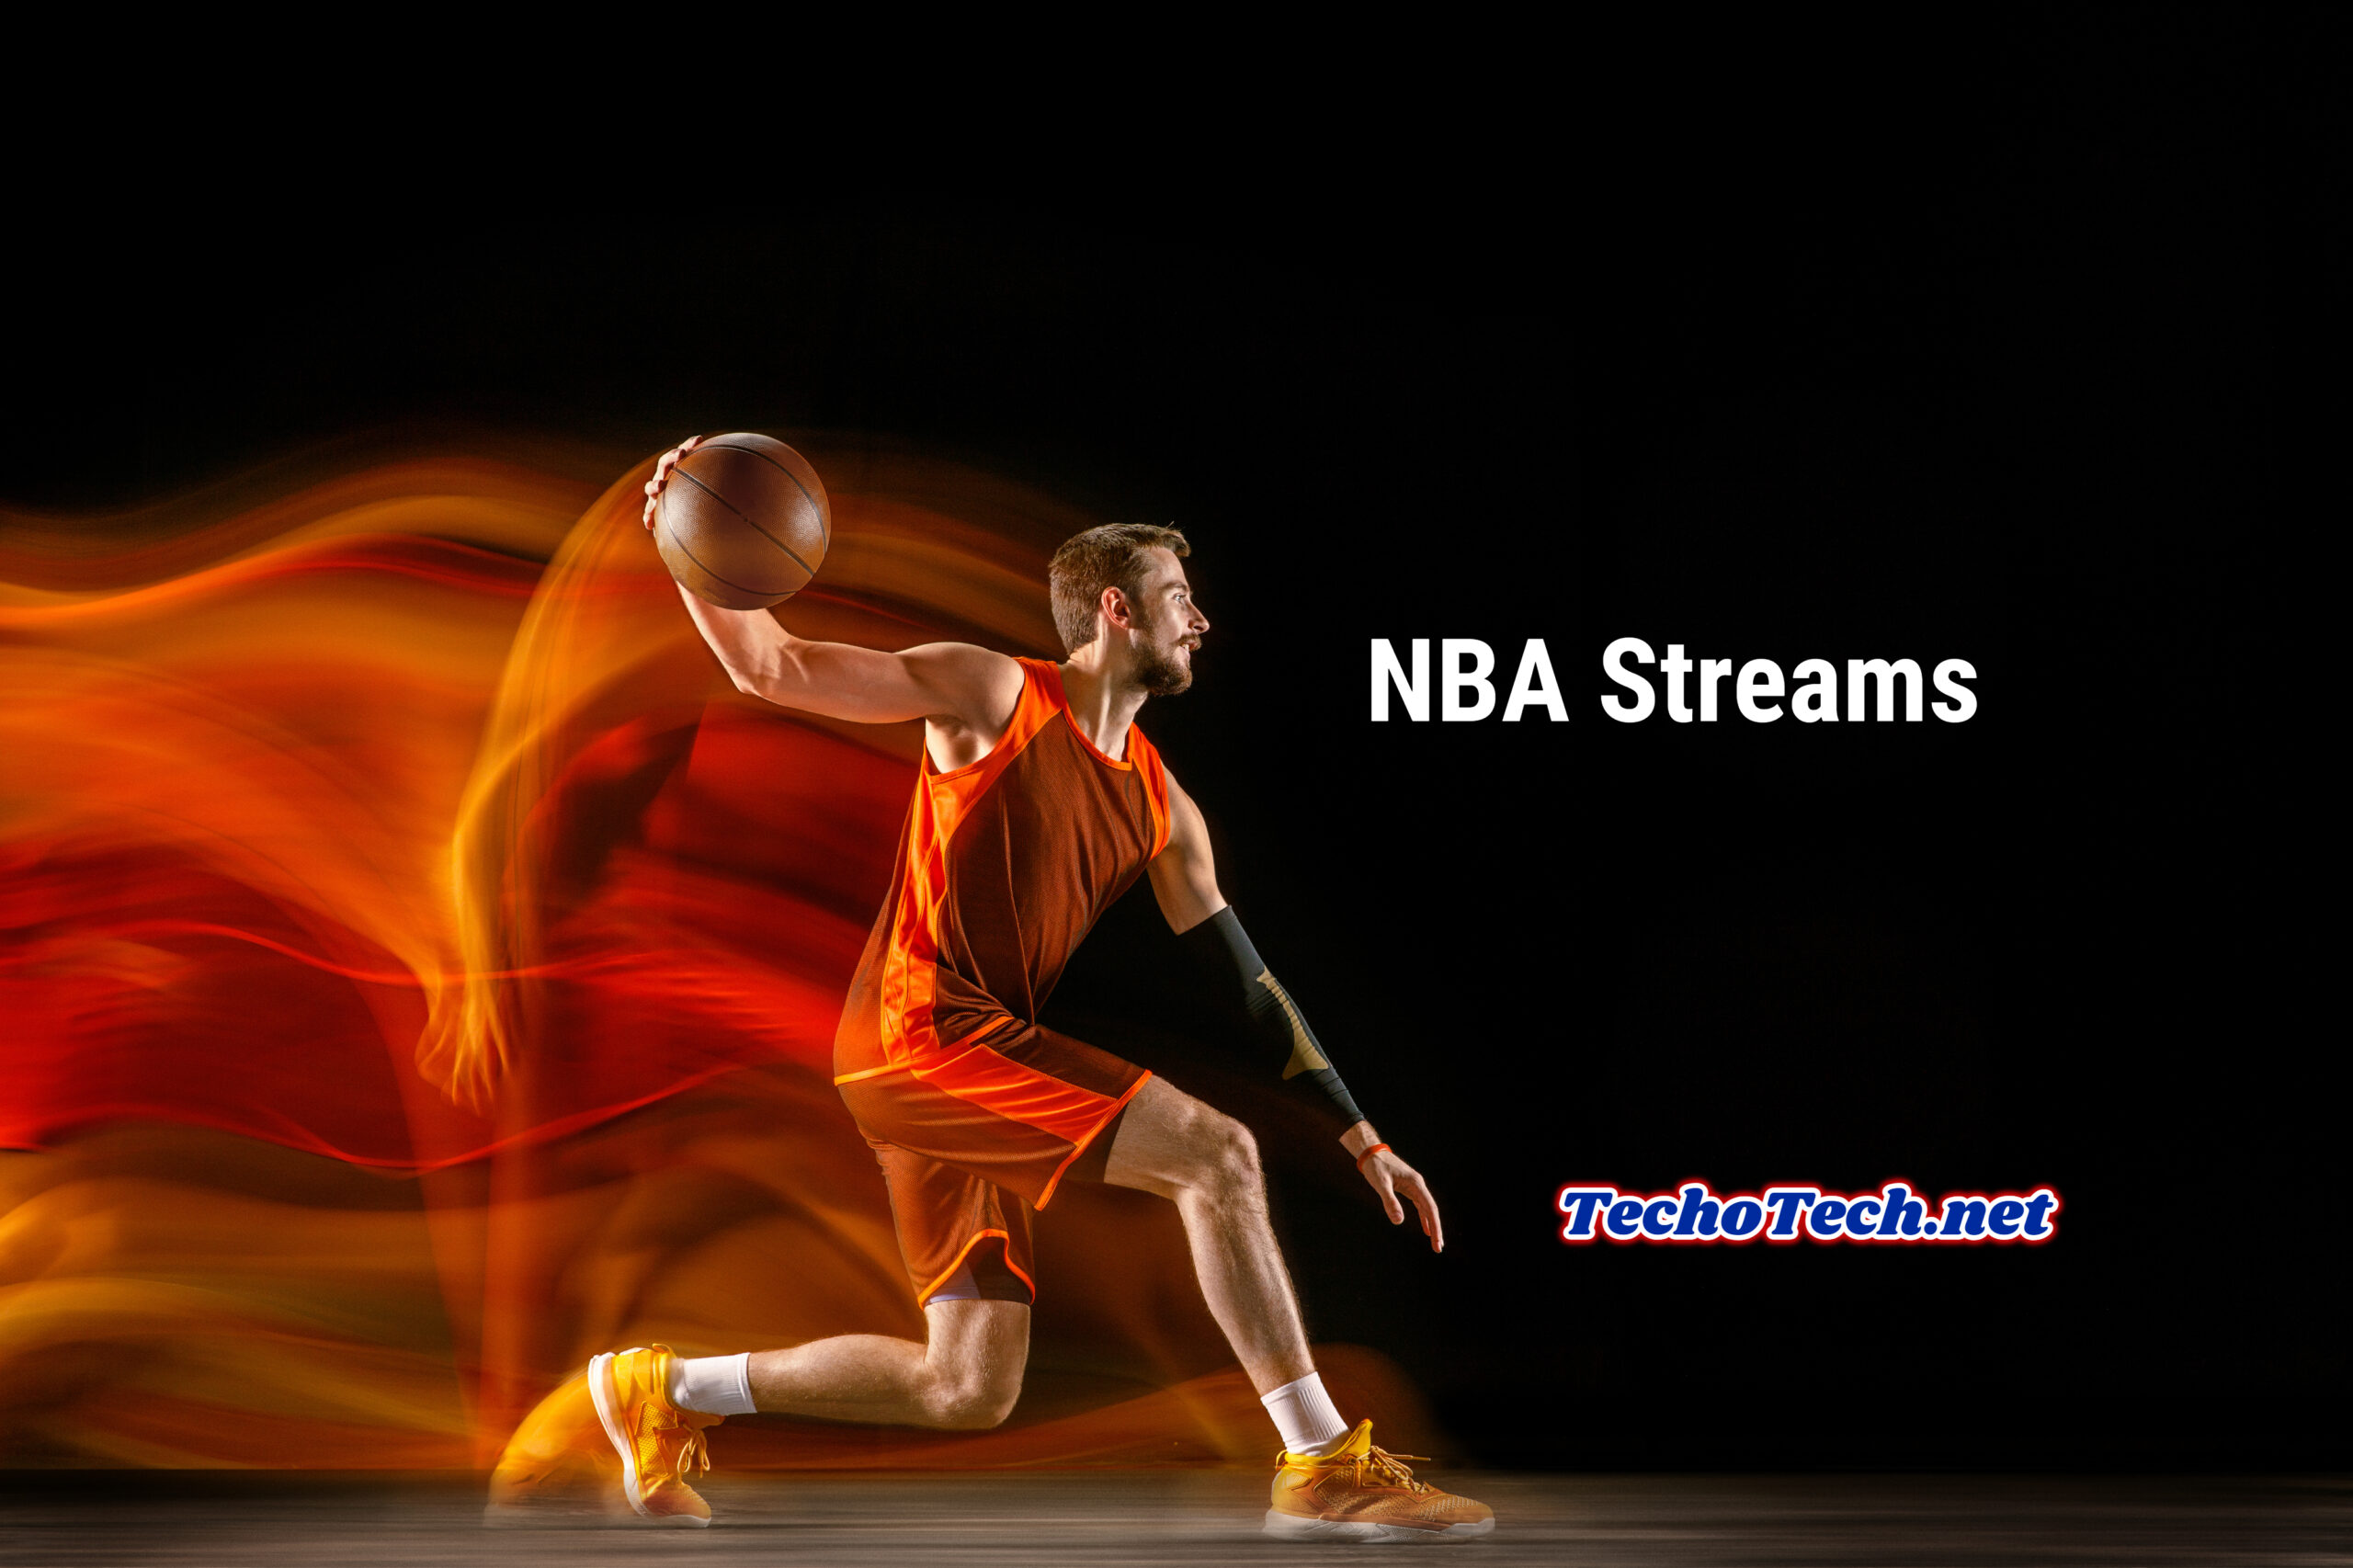 NBA Streams: The Best Way to Enjoy the Game